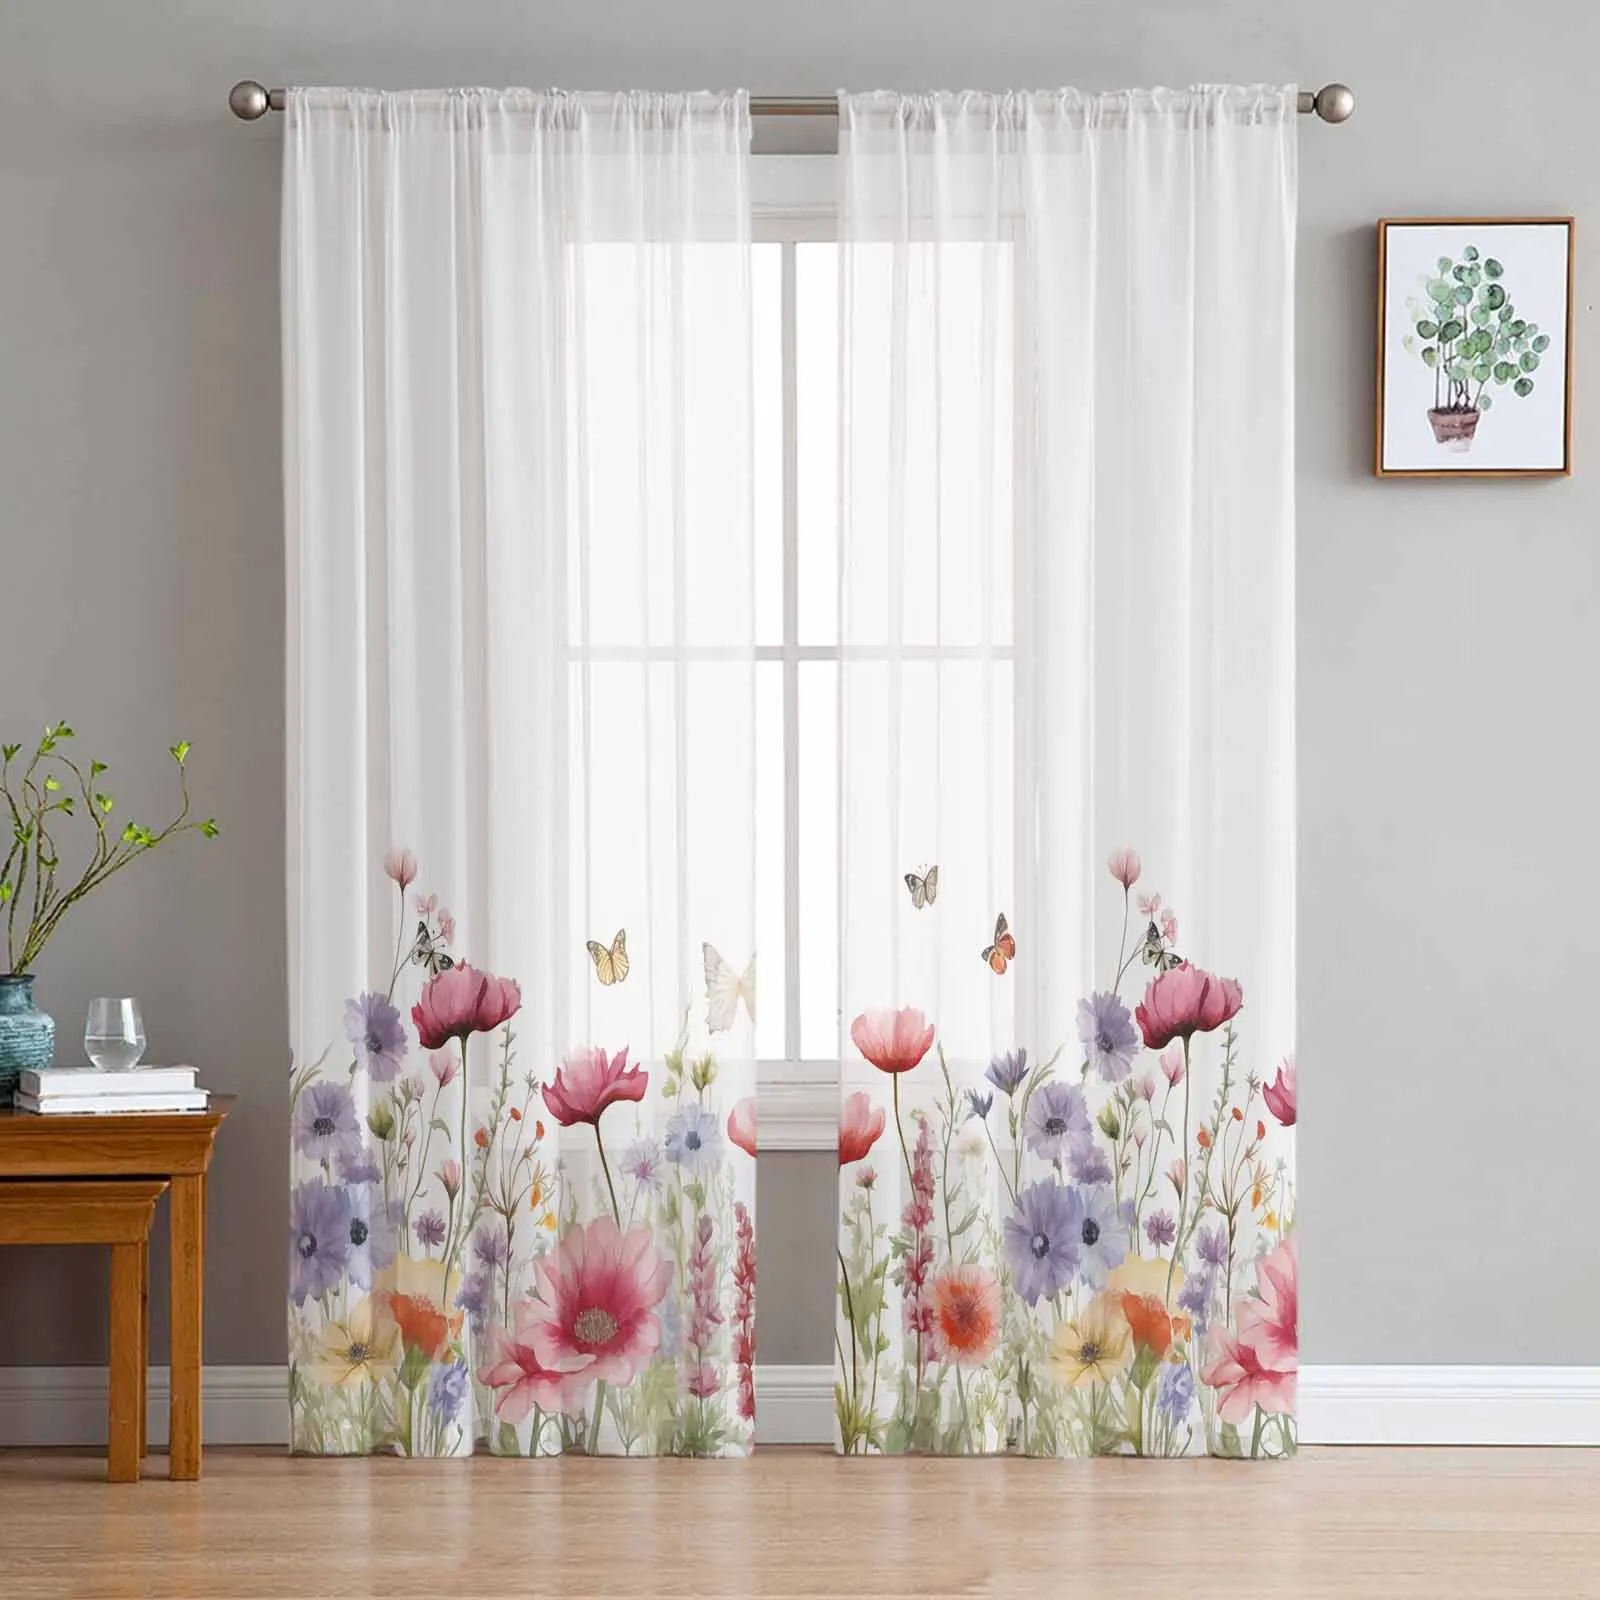 

Watercolor Flowers Plants Butterflies Lavender Daisies Sheer Curtains Living Room Tulle Window Curtain Home Bedroom Voile Drapes